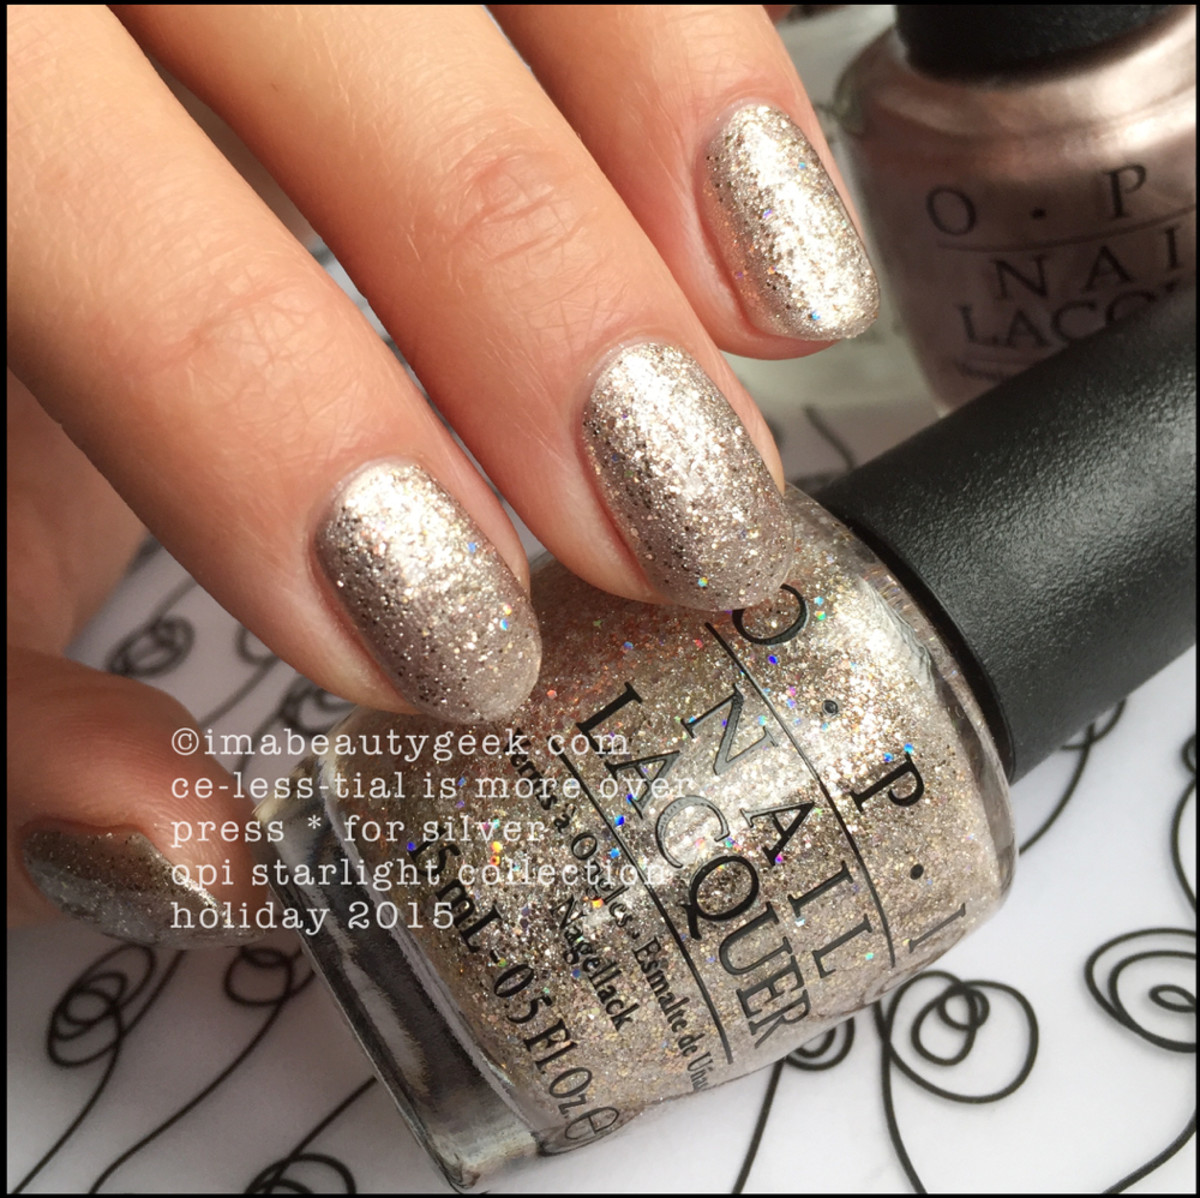 OPI Celestial Is More_OPI Starlight Swatches Holiday 2015